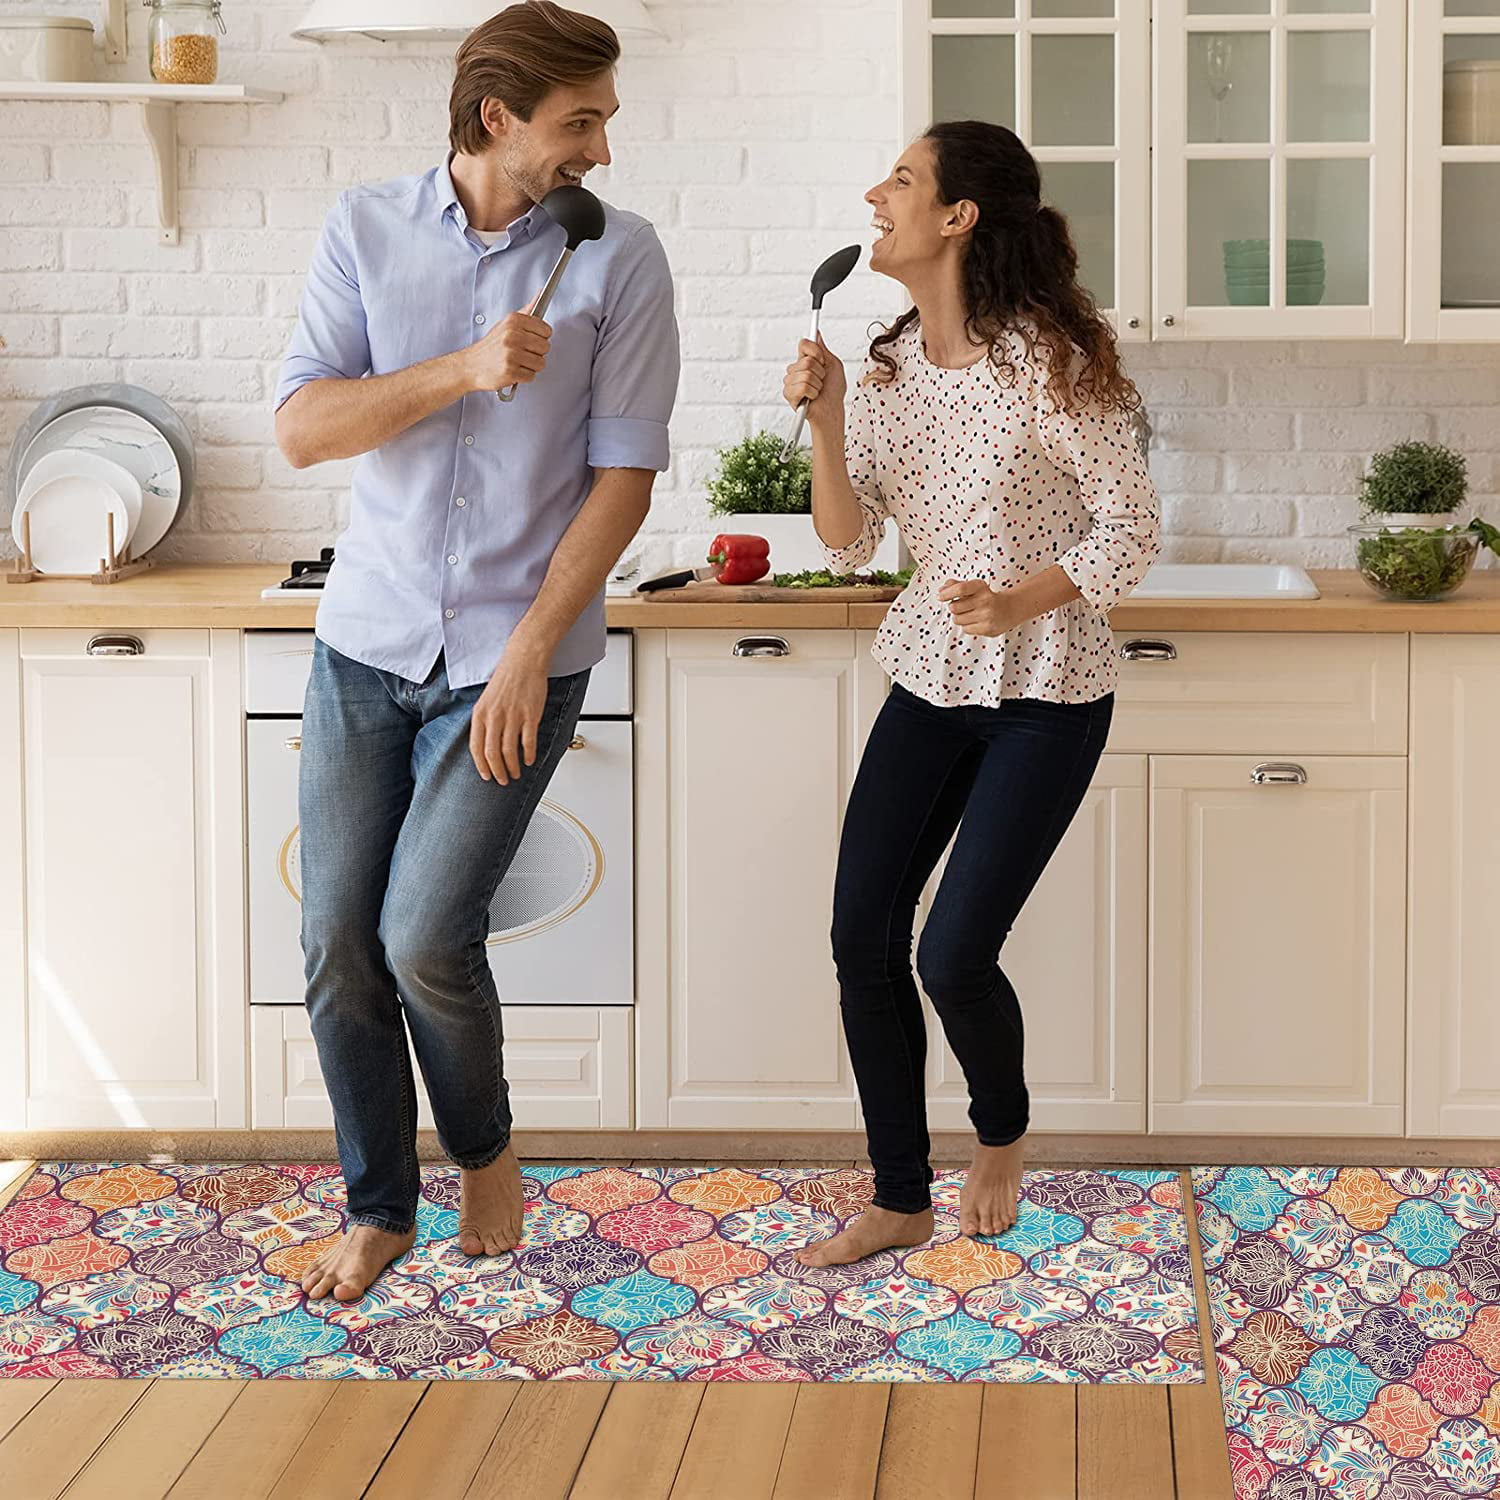 FRAMICS Boho Kitchen Rugs Set 2 Piece, Anti Fatigue Kitchen Mats for Floor, Kitchen  Rugs and